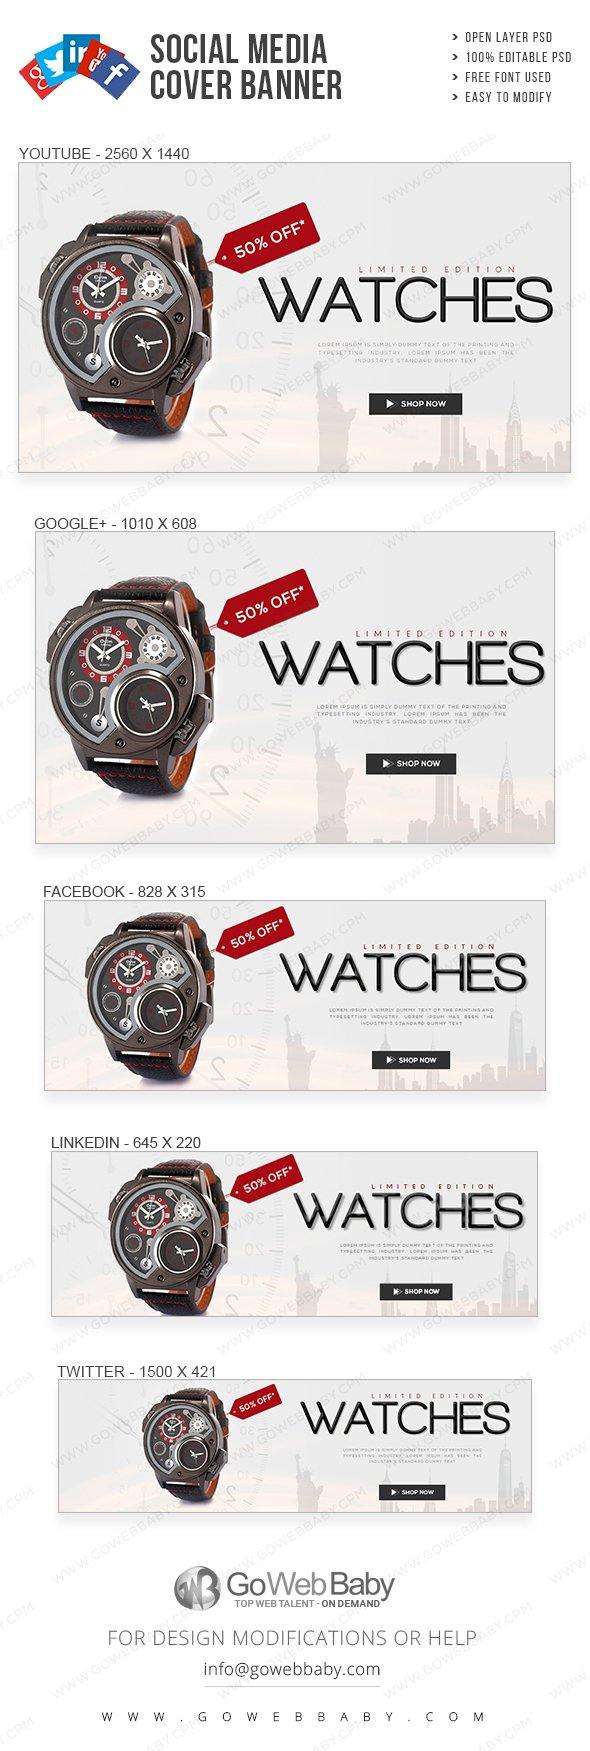 Social Media Cover Banner - Exclusive Watch Collection For Website Marketing - GoWebBaby.Com